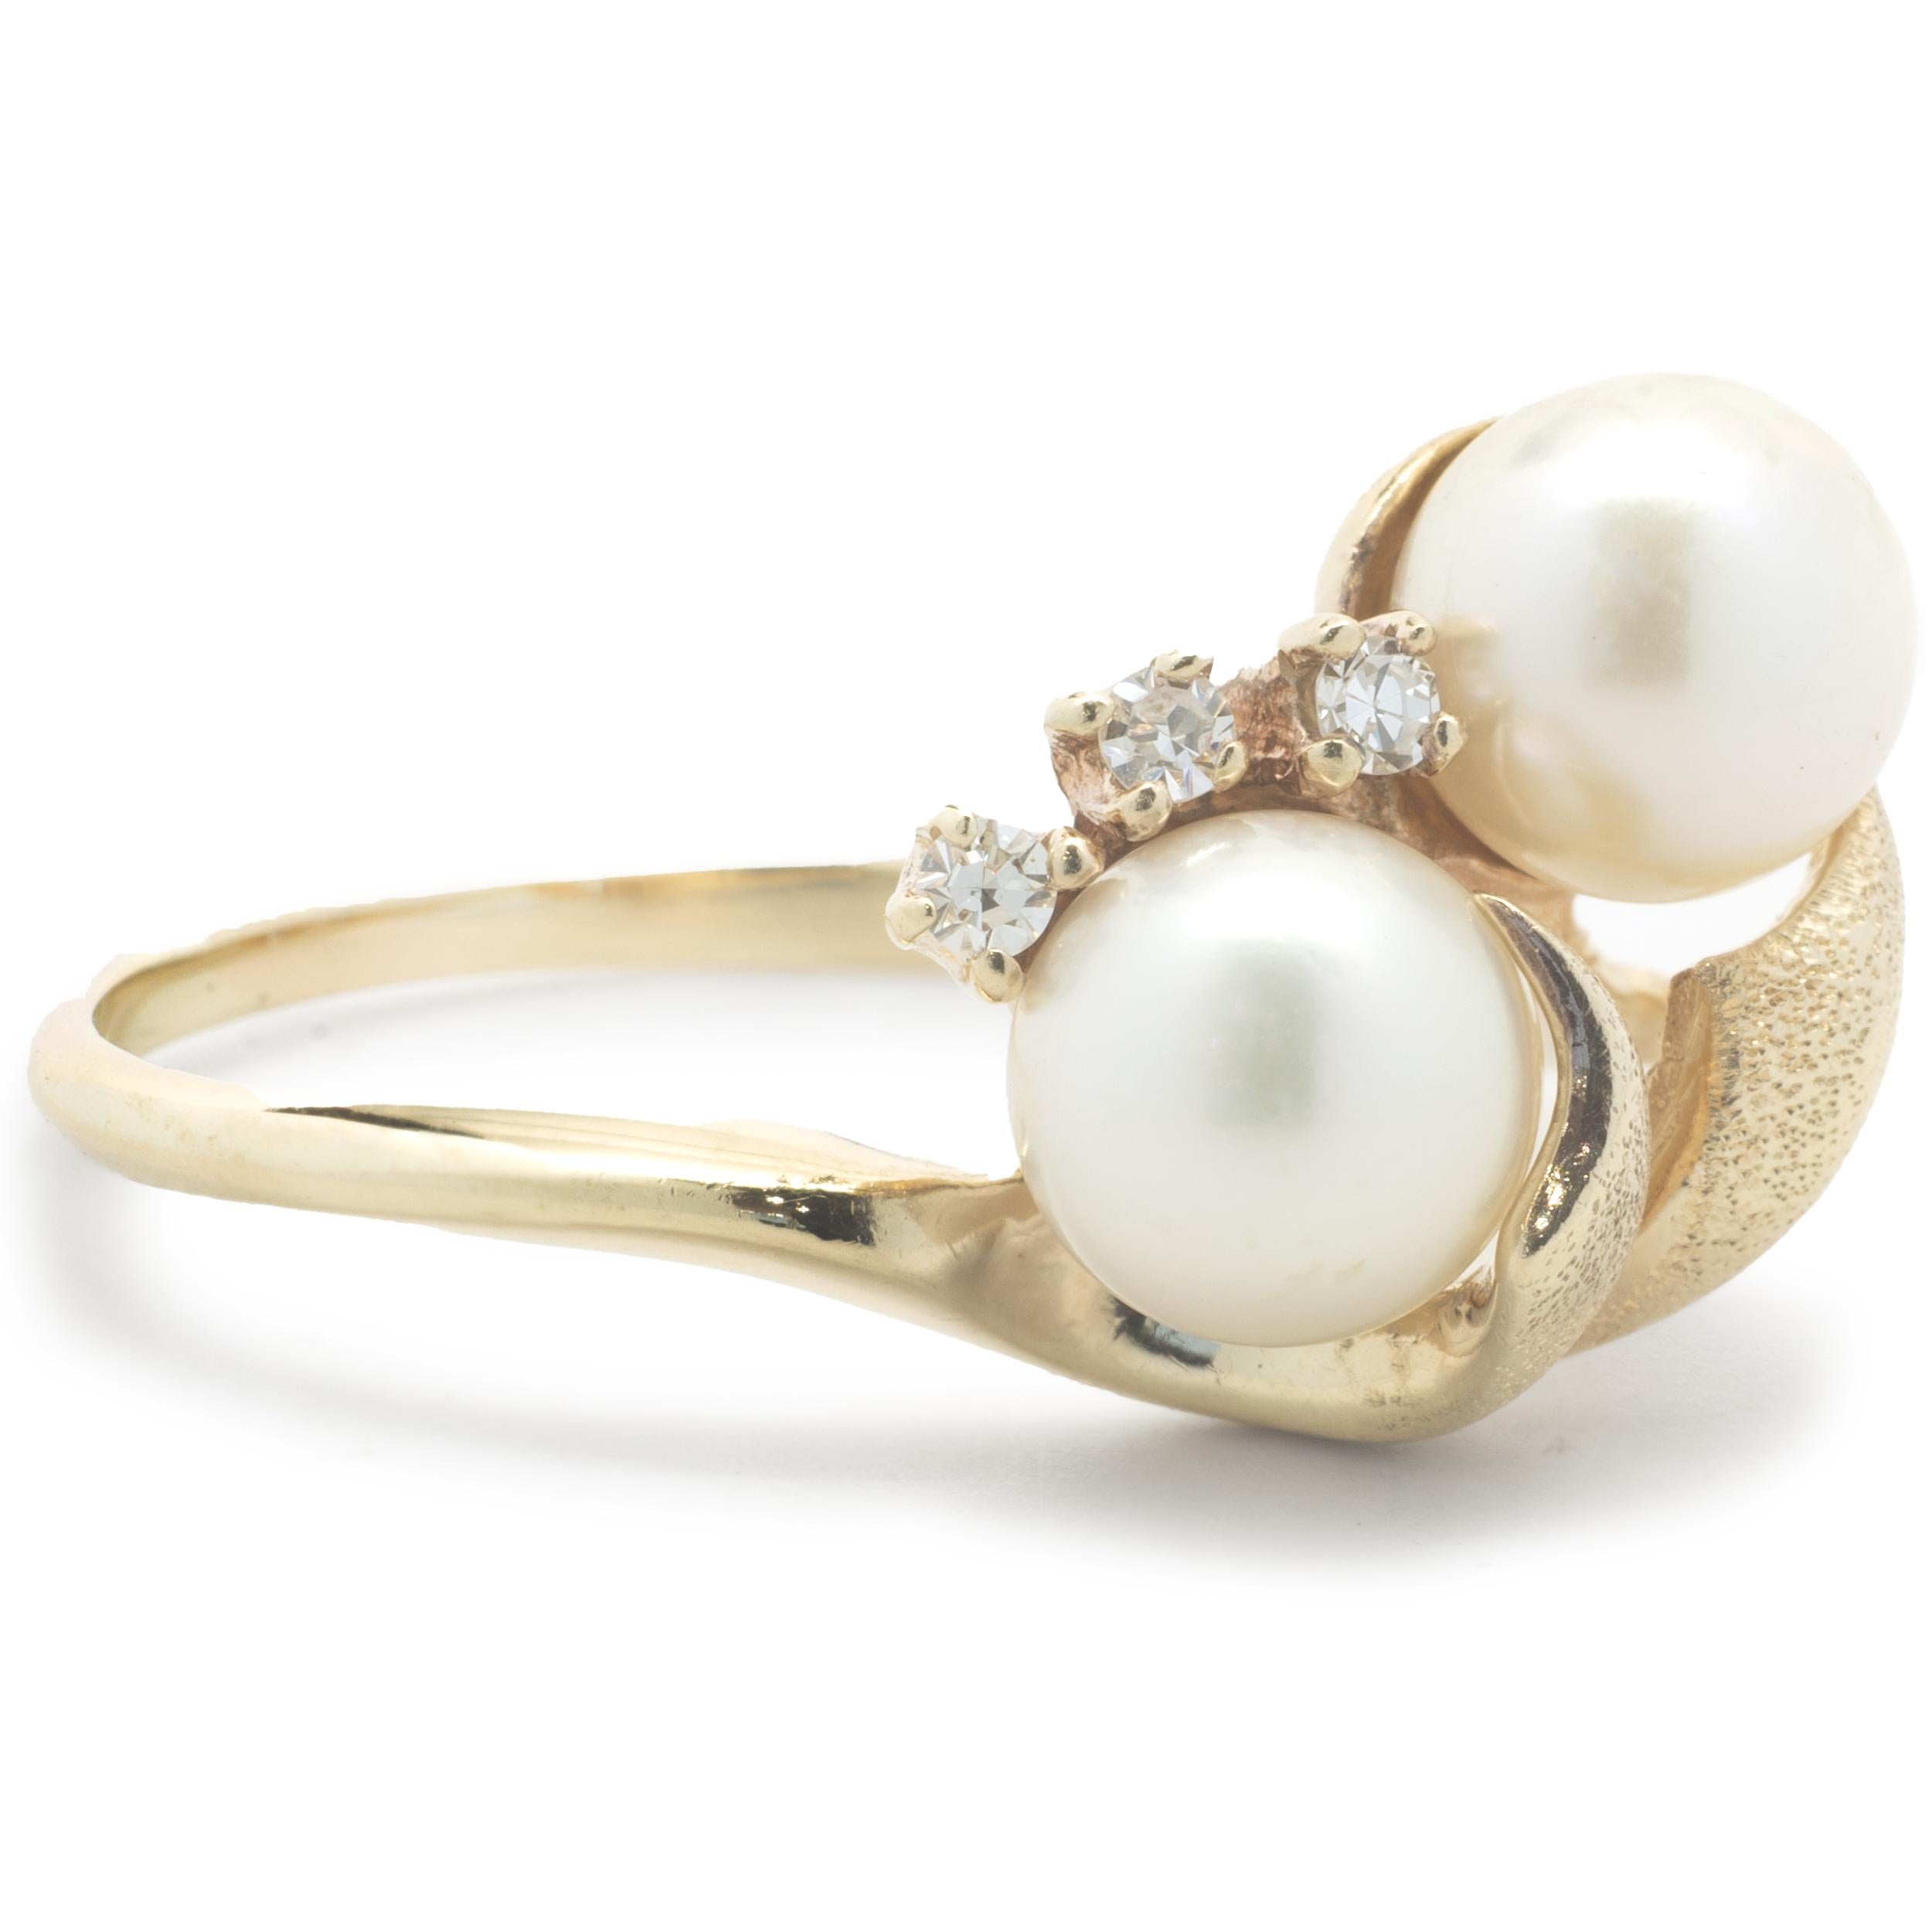 Material: 10K yellow gold
Pearl: 6.50mm akoya 
Diamond: 3 round brilliant cut = .05cttw
Color: H
Clarity: SI1
Ring Size: 8.5 (please allow two additional shipping days for sizing requests)
Dimensions: ring measures 13.30mm wide
Weight:  3.59 grams
